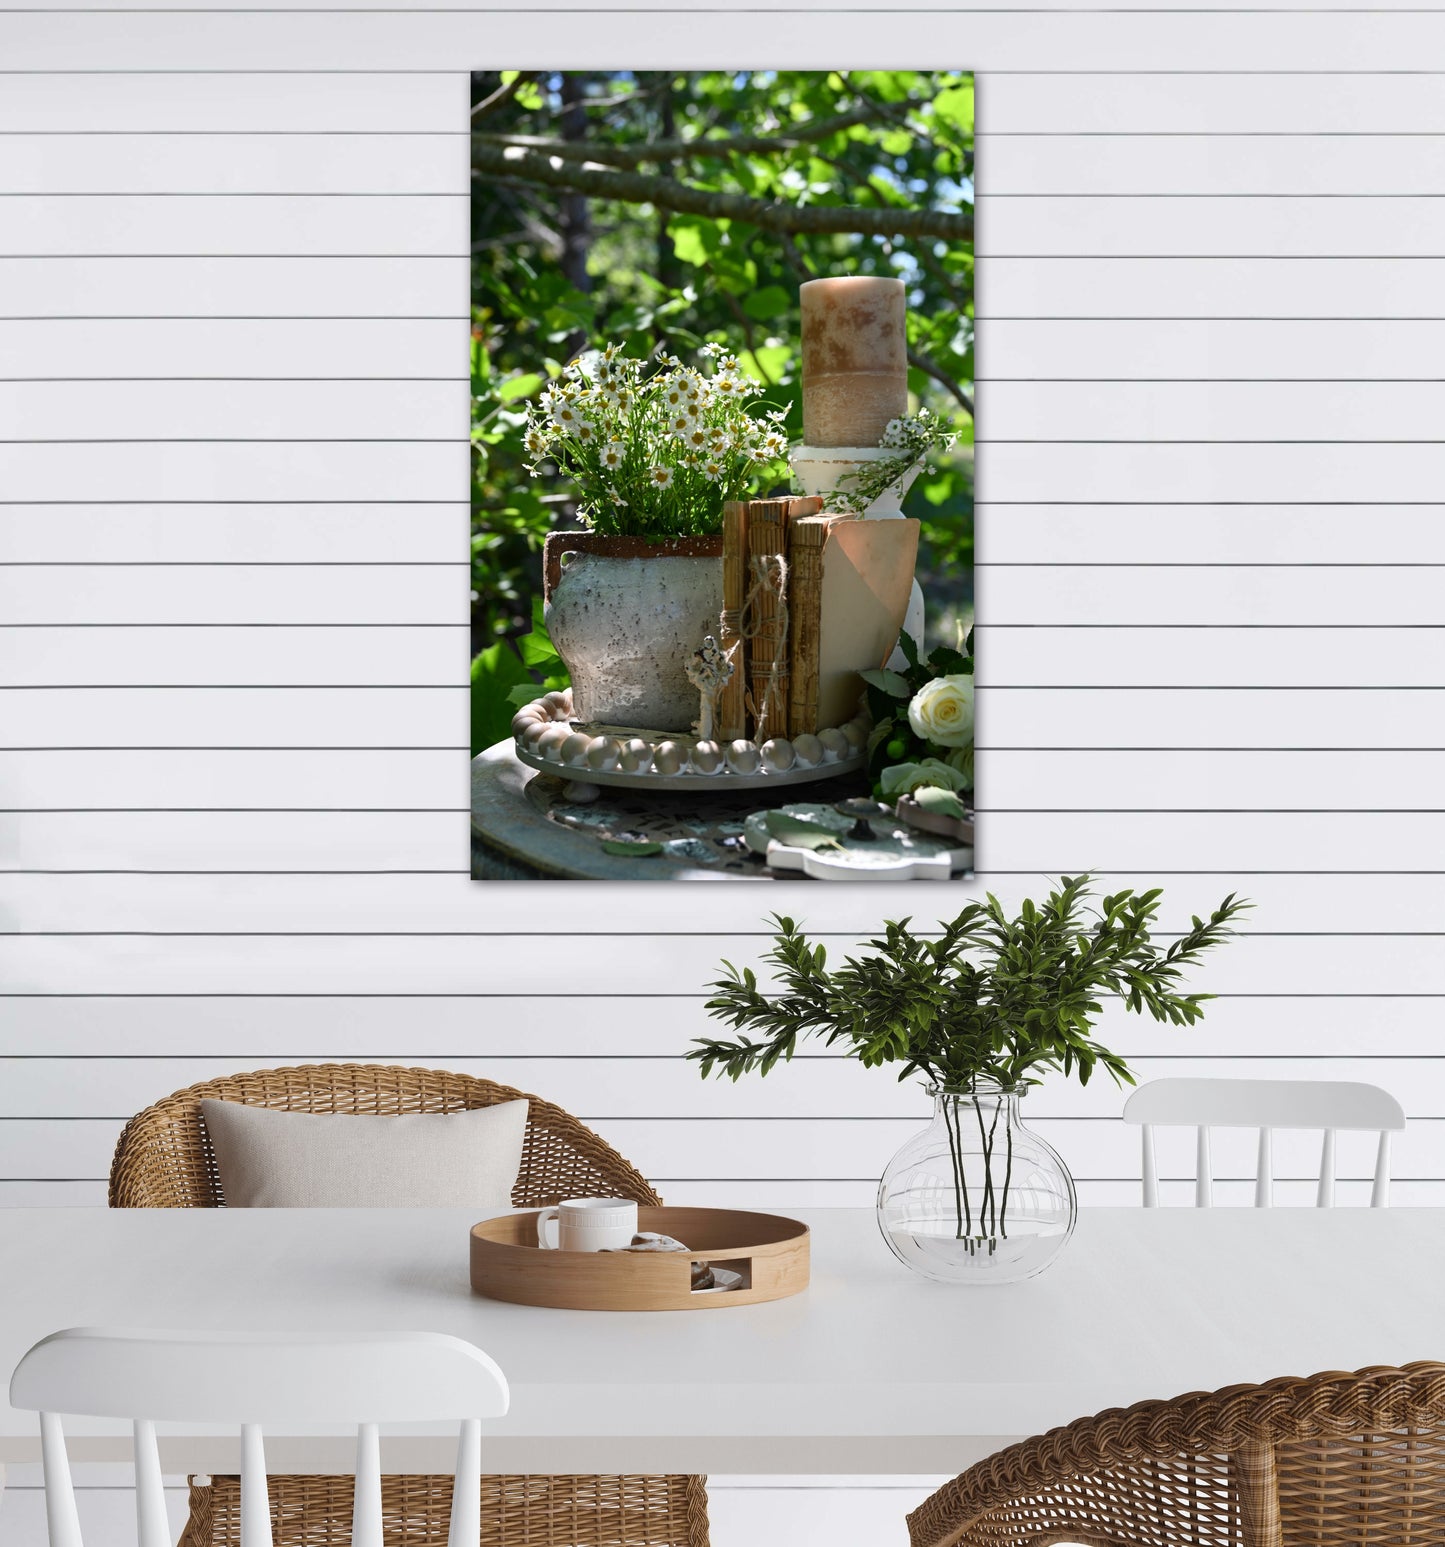 Shabby chic daises, books, and key photography canvas print on dining room wall